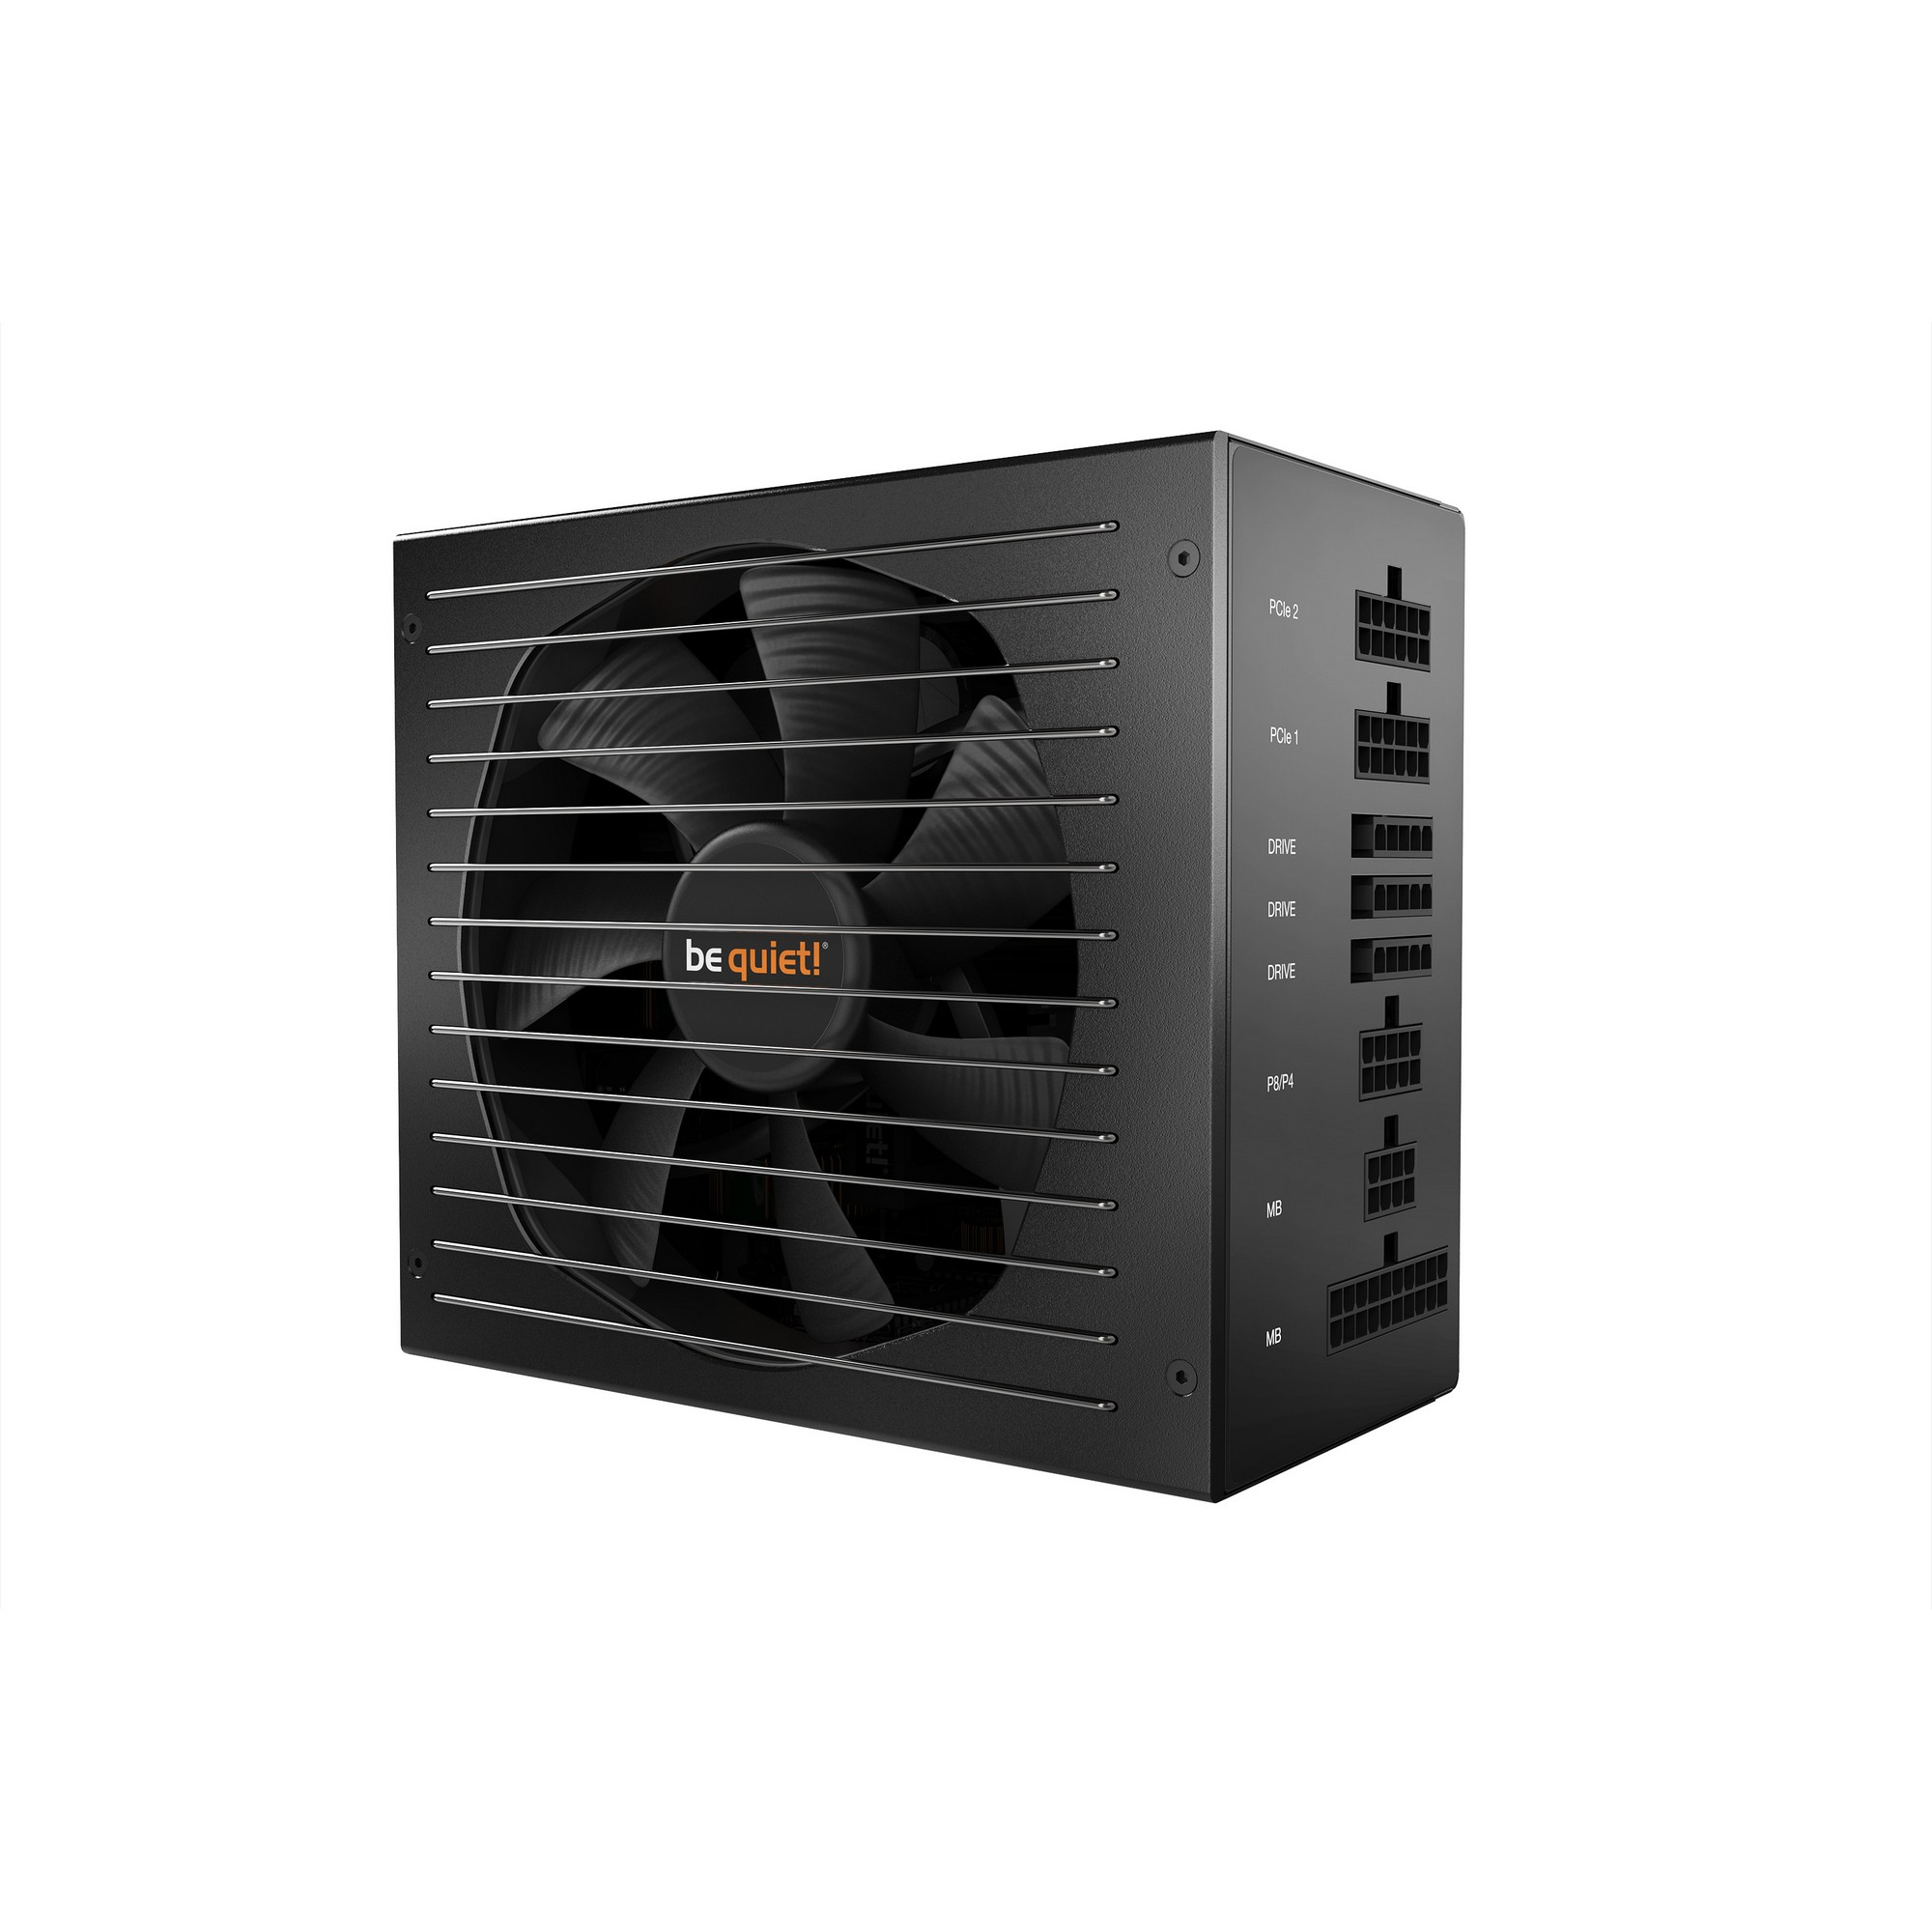 be quiet! - be quiet Straight Power 11 450W 80 Plus Gold Modular Power Supply